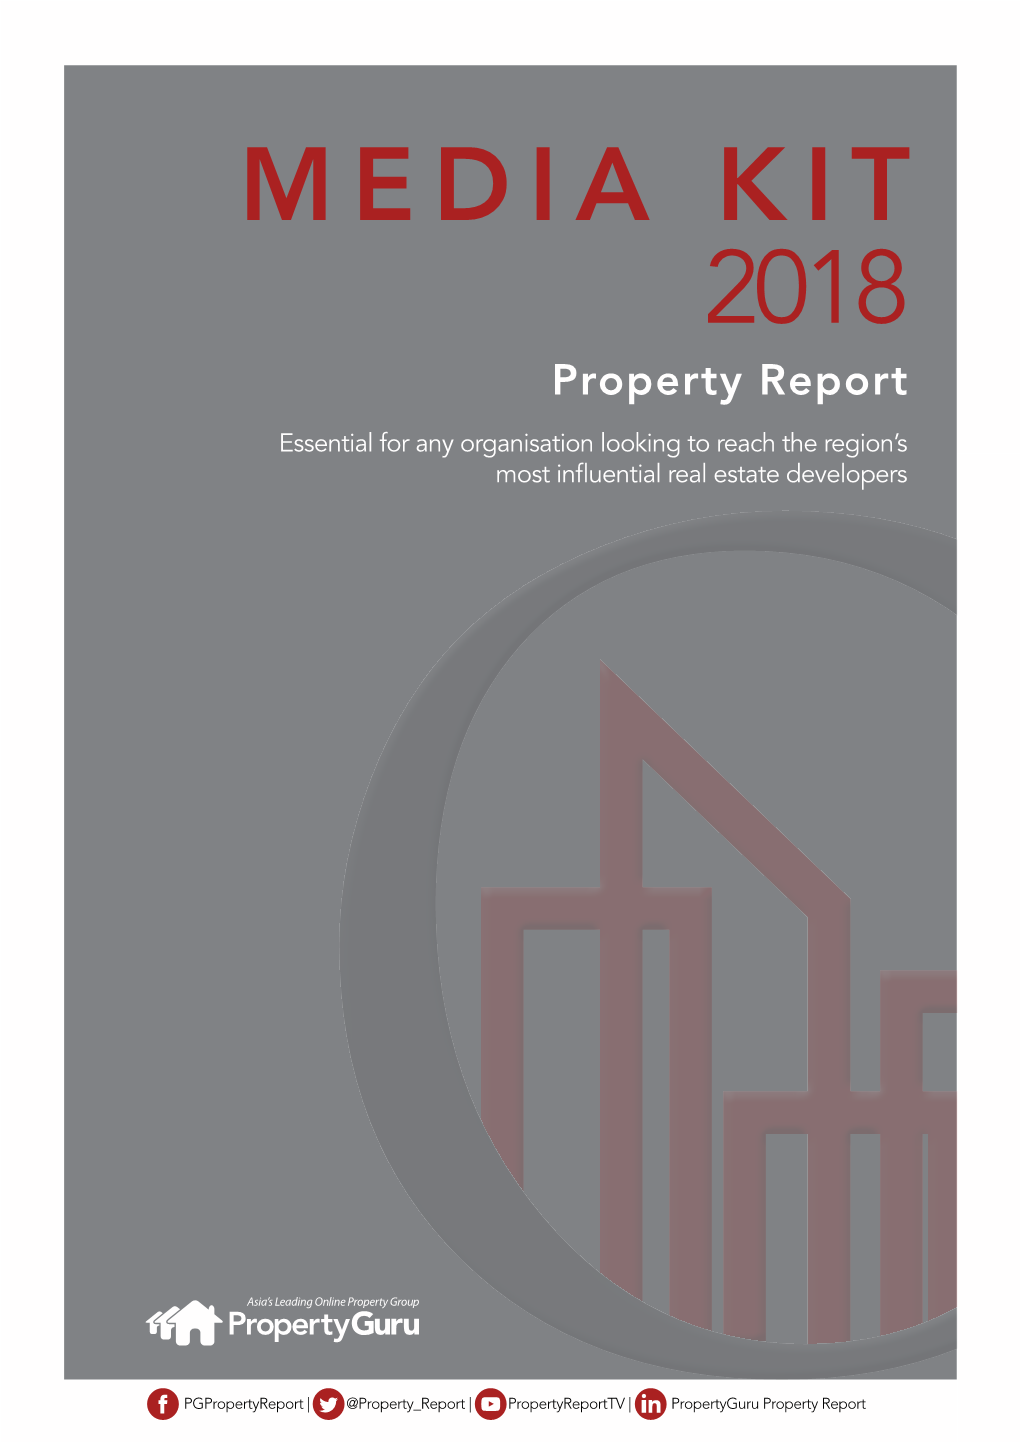 MEDIA KIT 2018 Property Report Essential for Any Organisation Looking to Reach the Region’S Most Influential Real Estate Developers